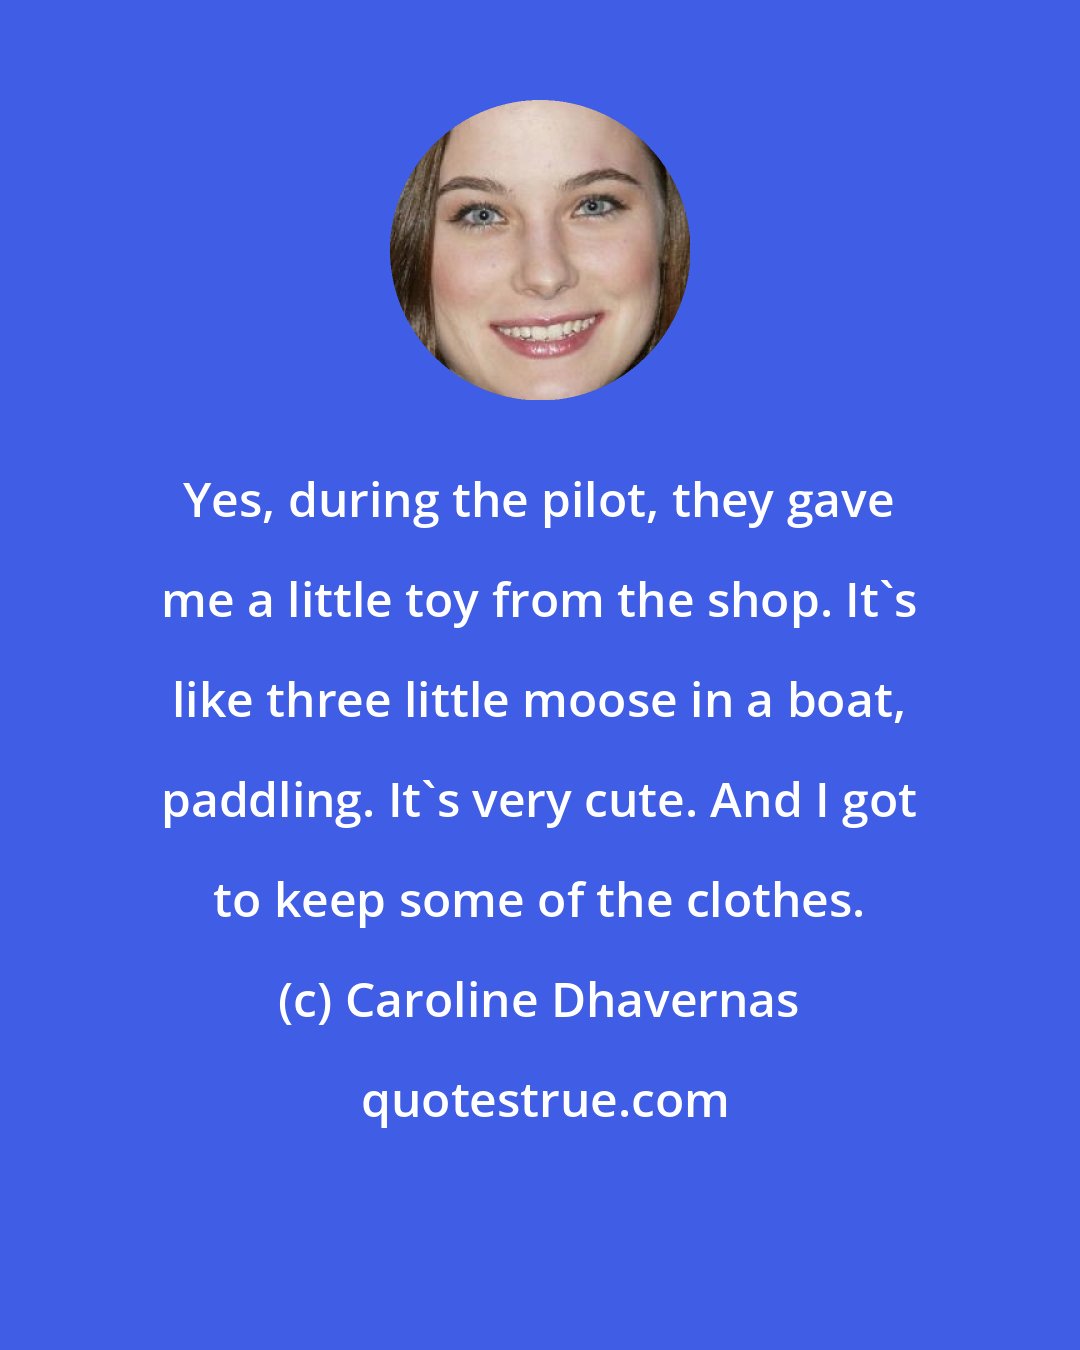 Caroline Dhavernas: Yes, during the pilot, they gave me a little toy from the shop. It's like three little moose in a boat, paddling. It's very cute. And I got to keep some of the clothes.